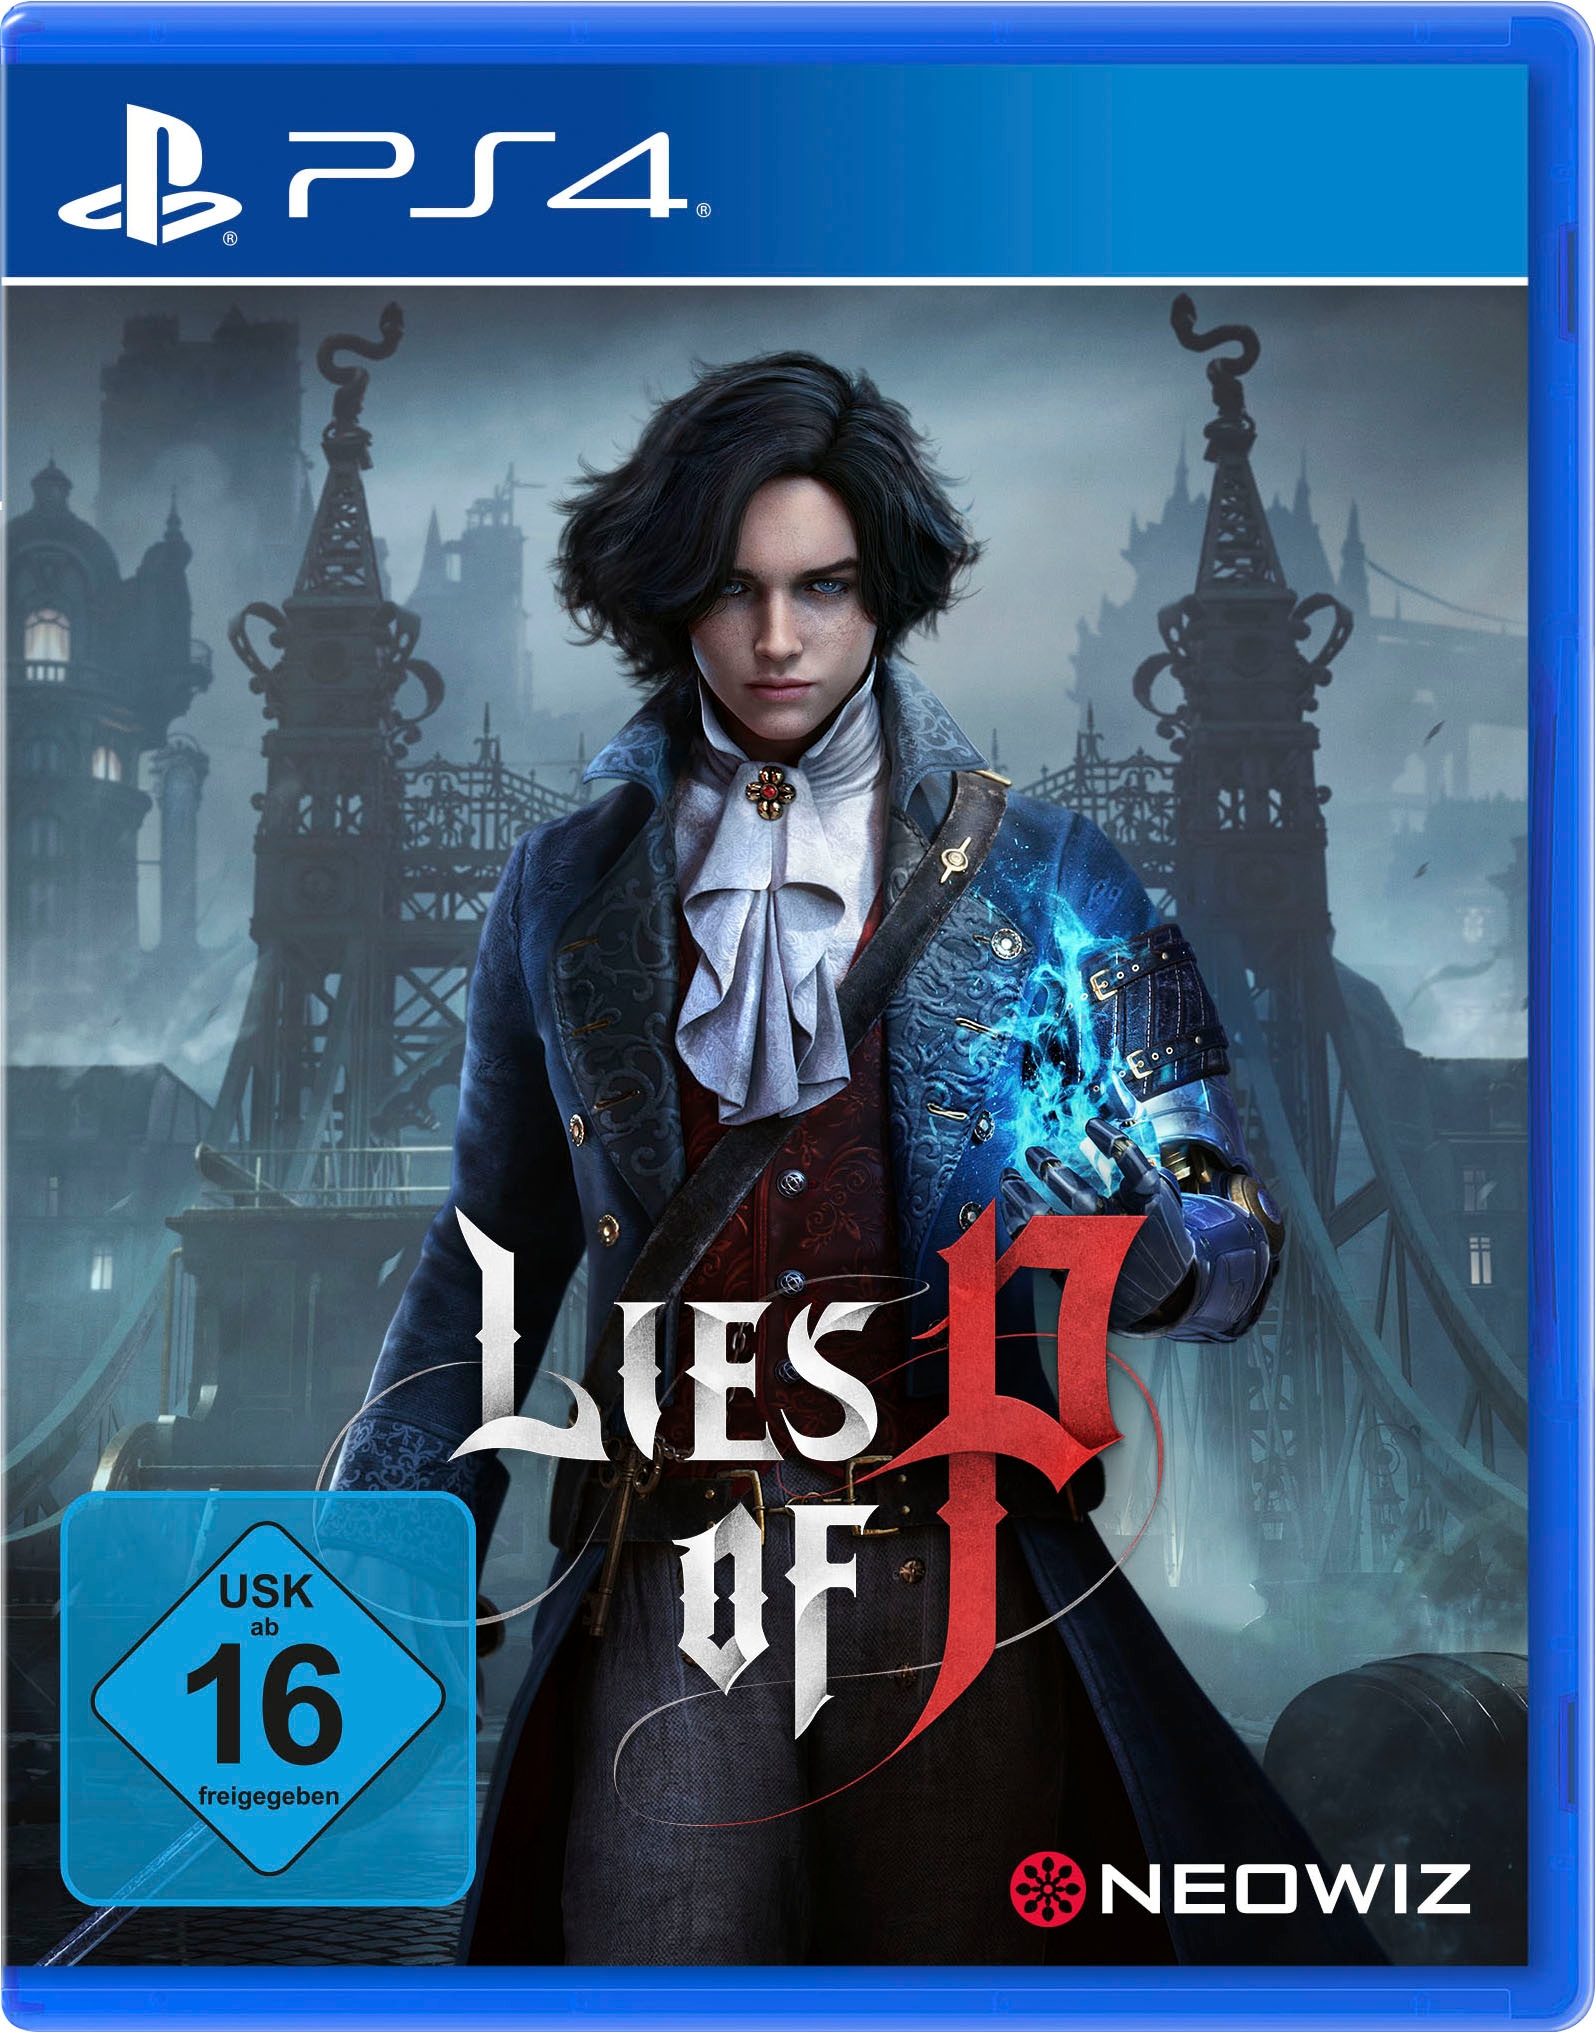 Spielesoftware »Lies of P«, PlayStation 4